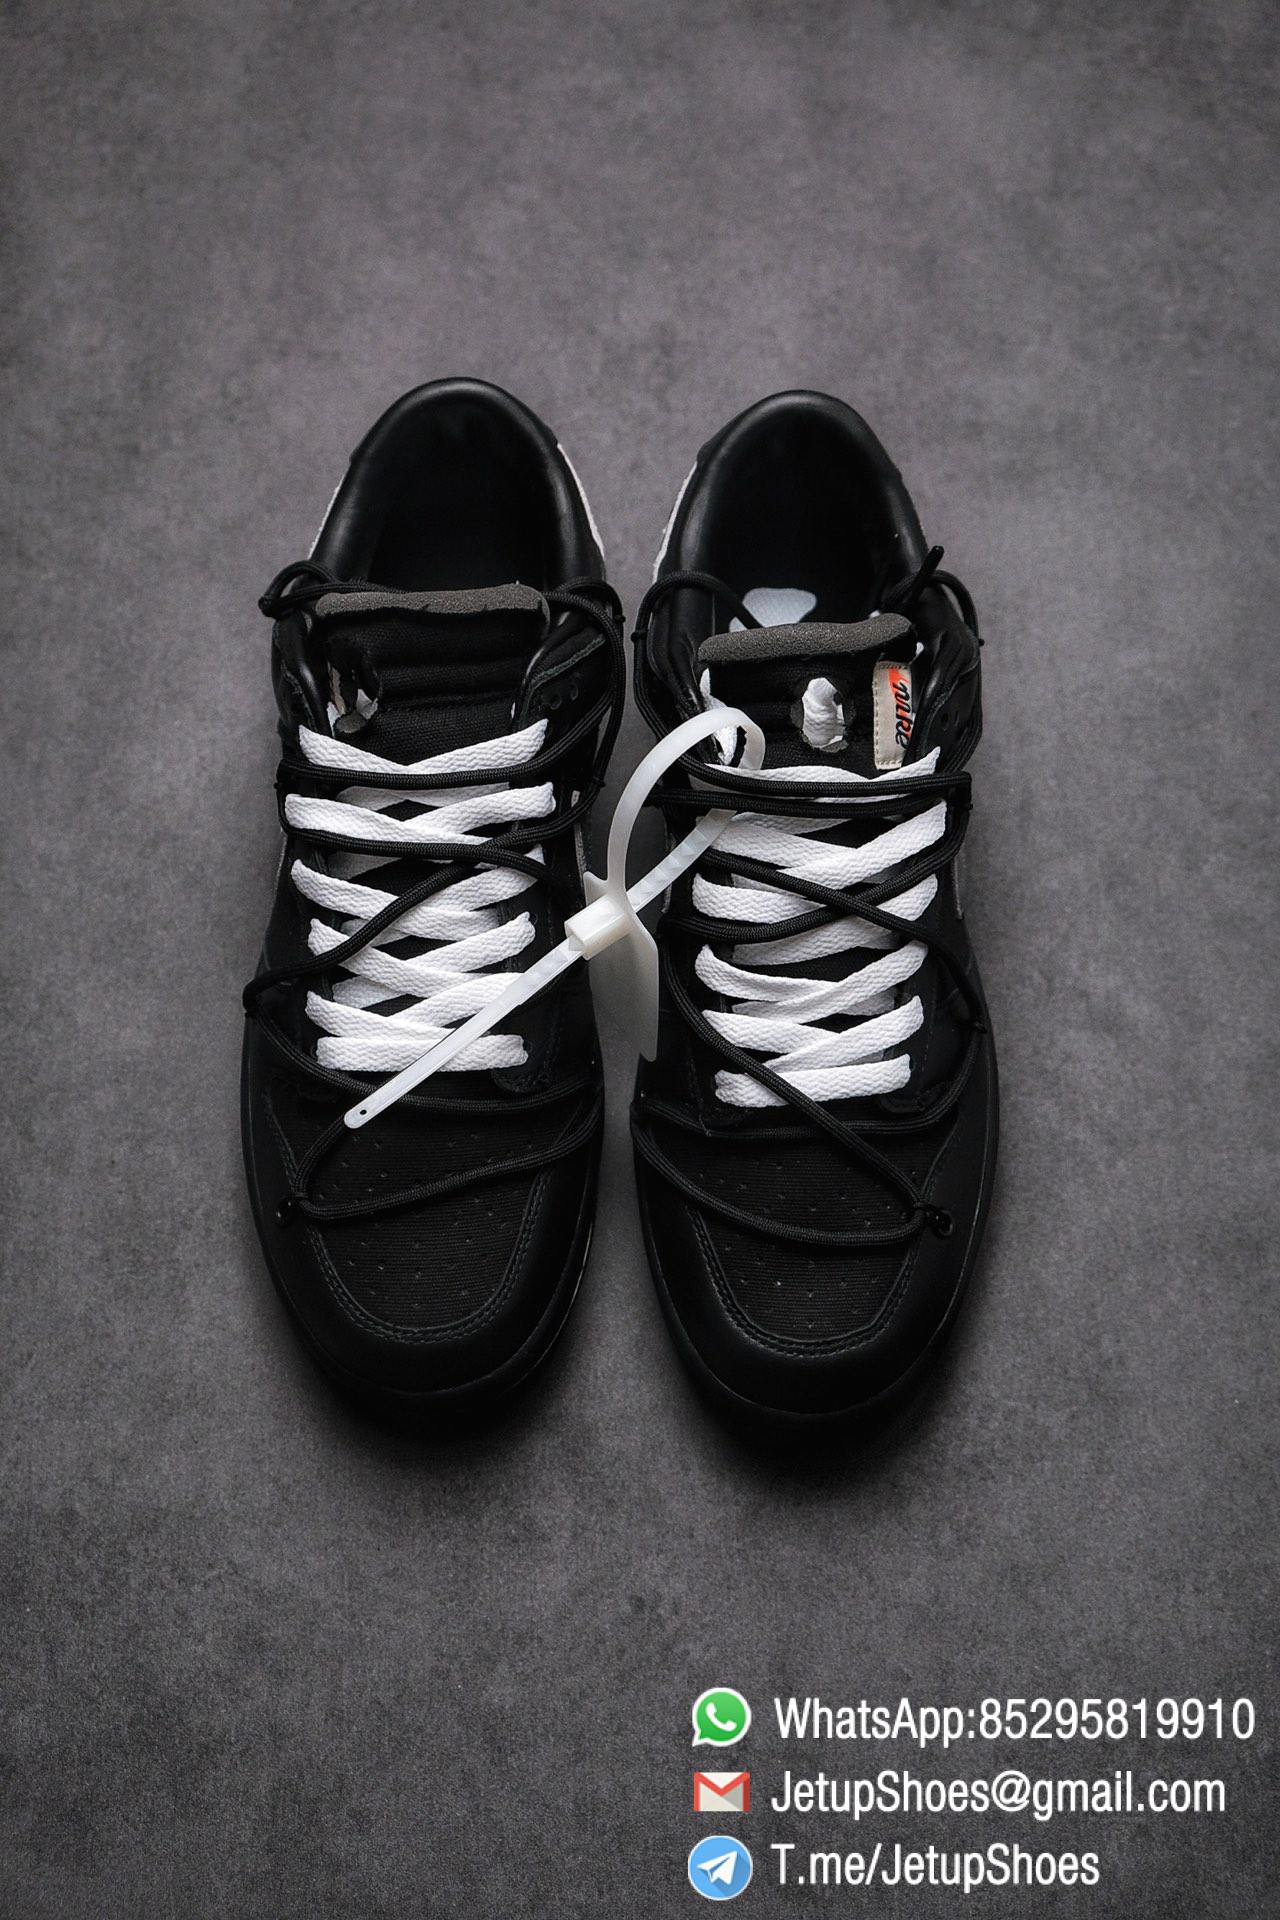 Off White x Nike Dunk Low THE 50 Jet black Leather Construction Metallic Silver Swoosh Relays Best Replica Sneakers 02